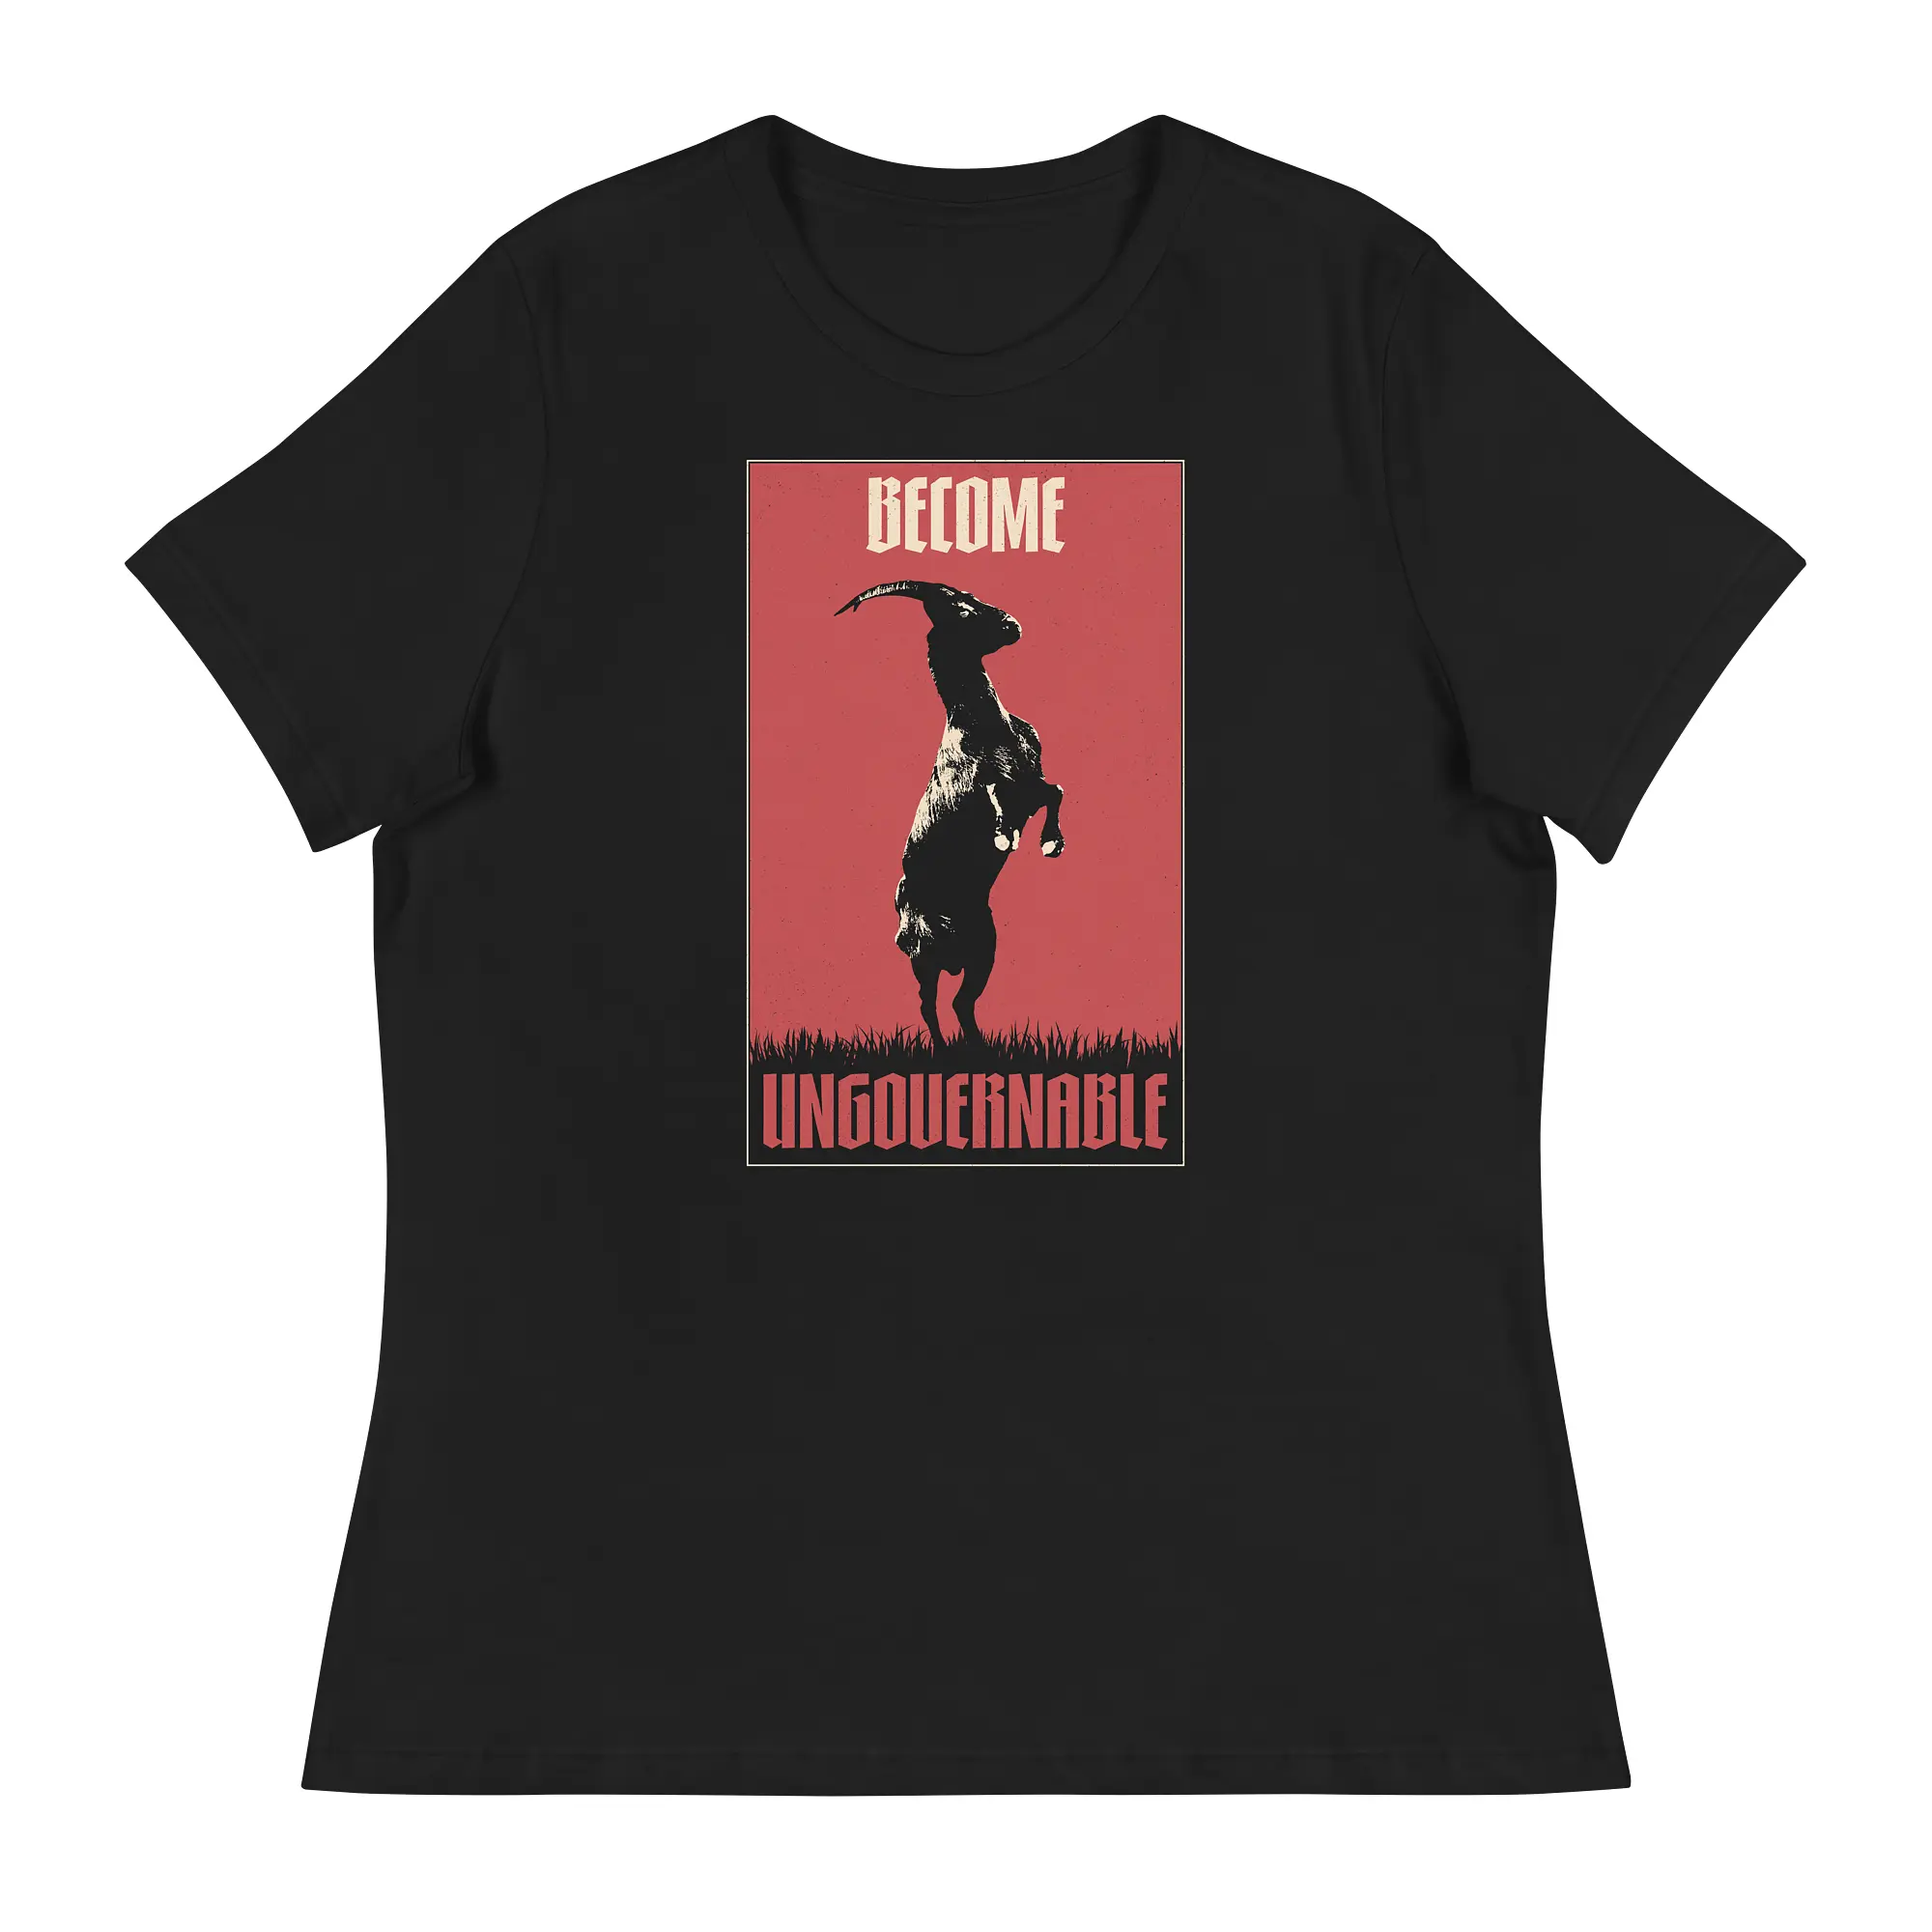 “Become Ungovernable” standing goat tee